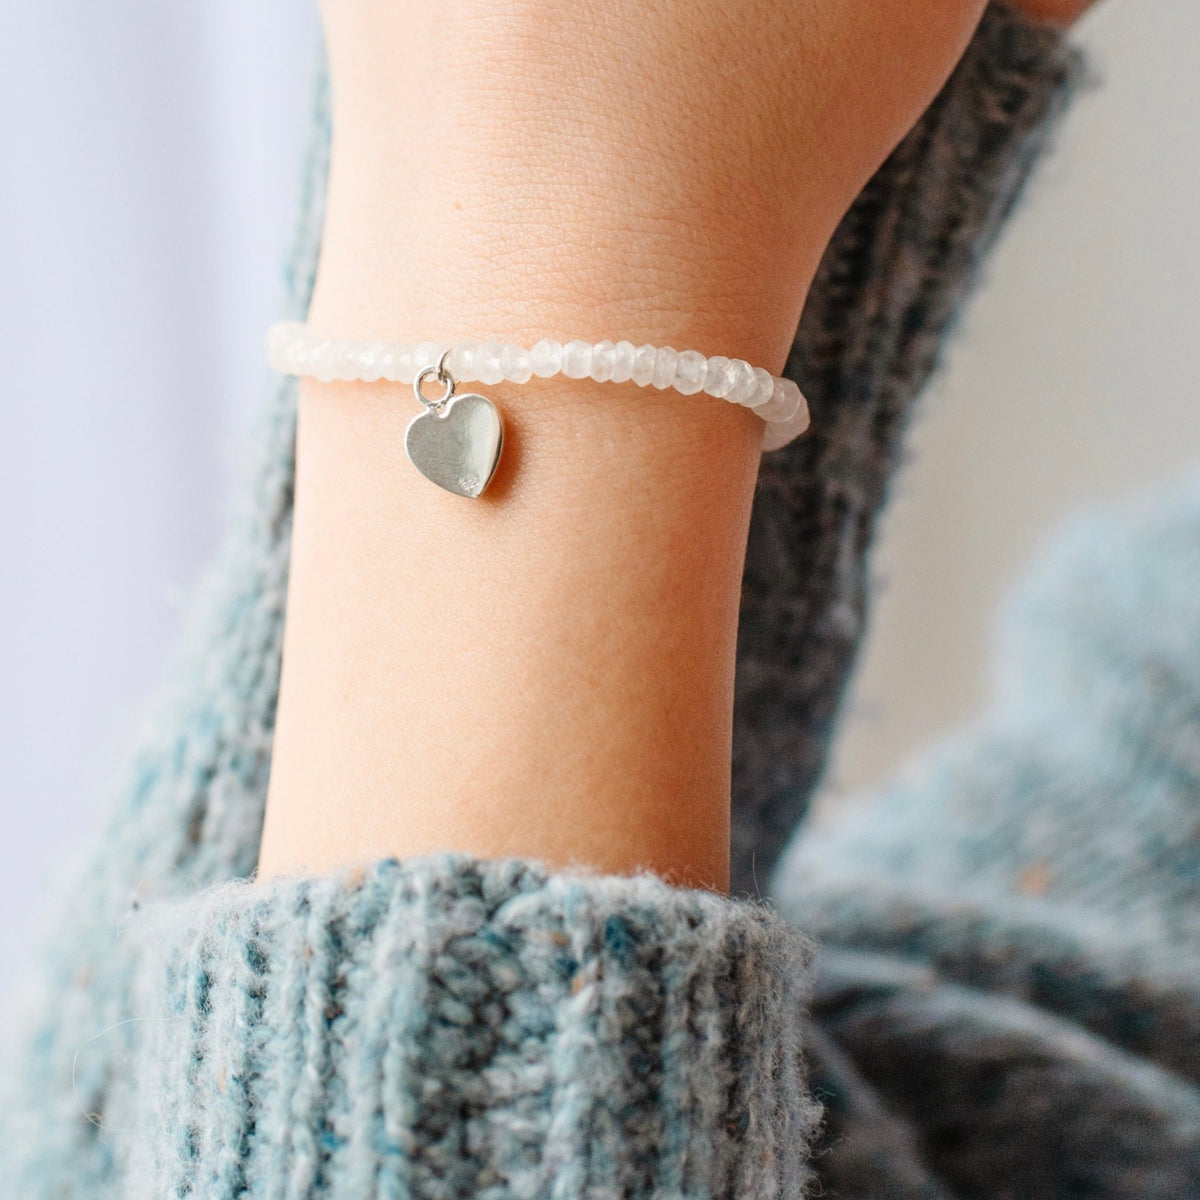 FRAICHE INSPIRE SWEETHEART STRETCH BRACELET - MOONSTONE, MOTHER OF PEARL &amp; SILVER - SO PRETTY CARA COTTER